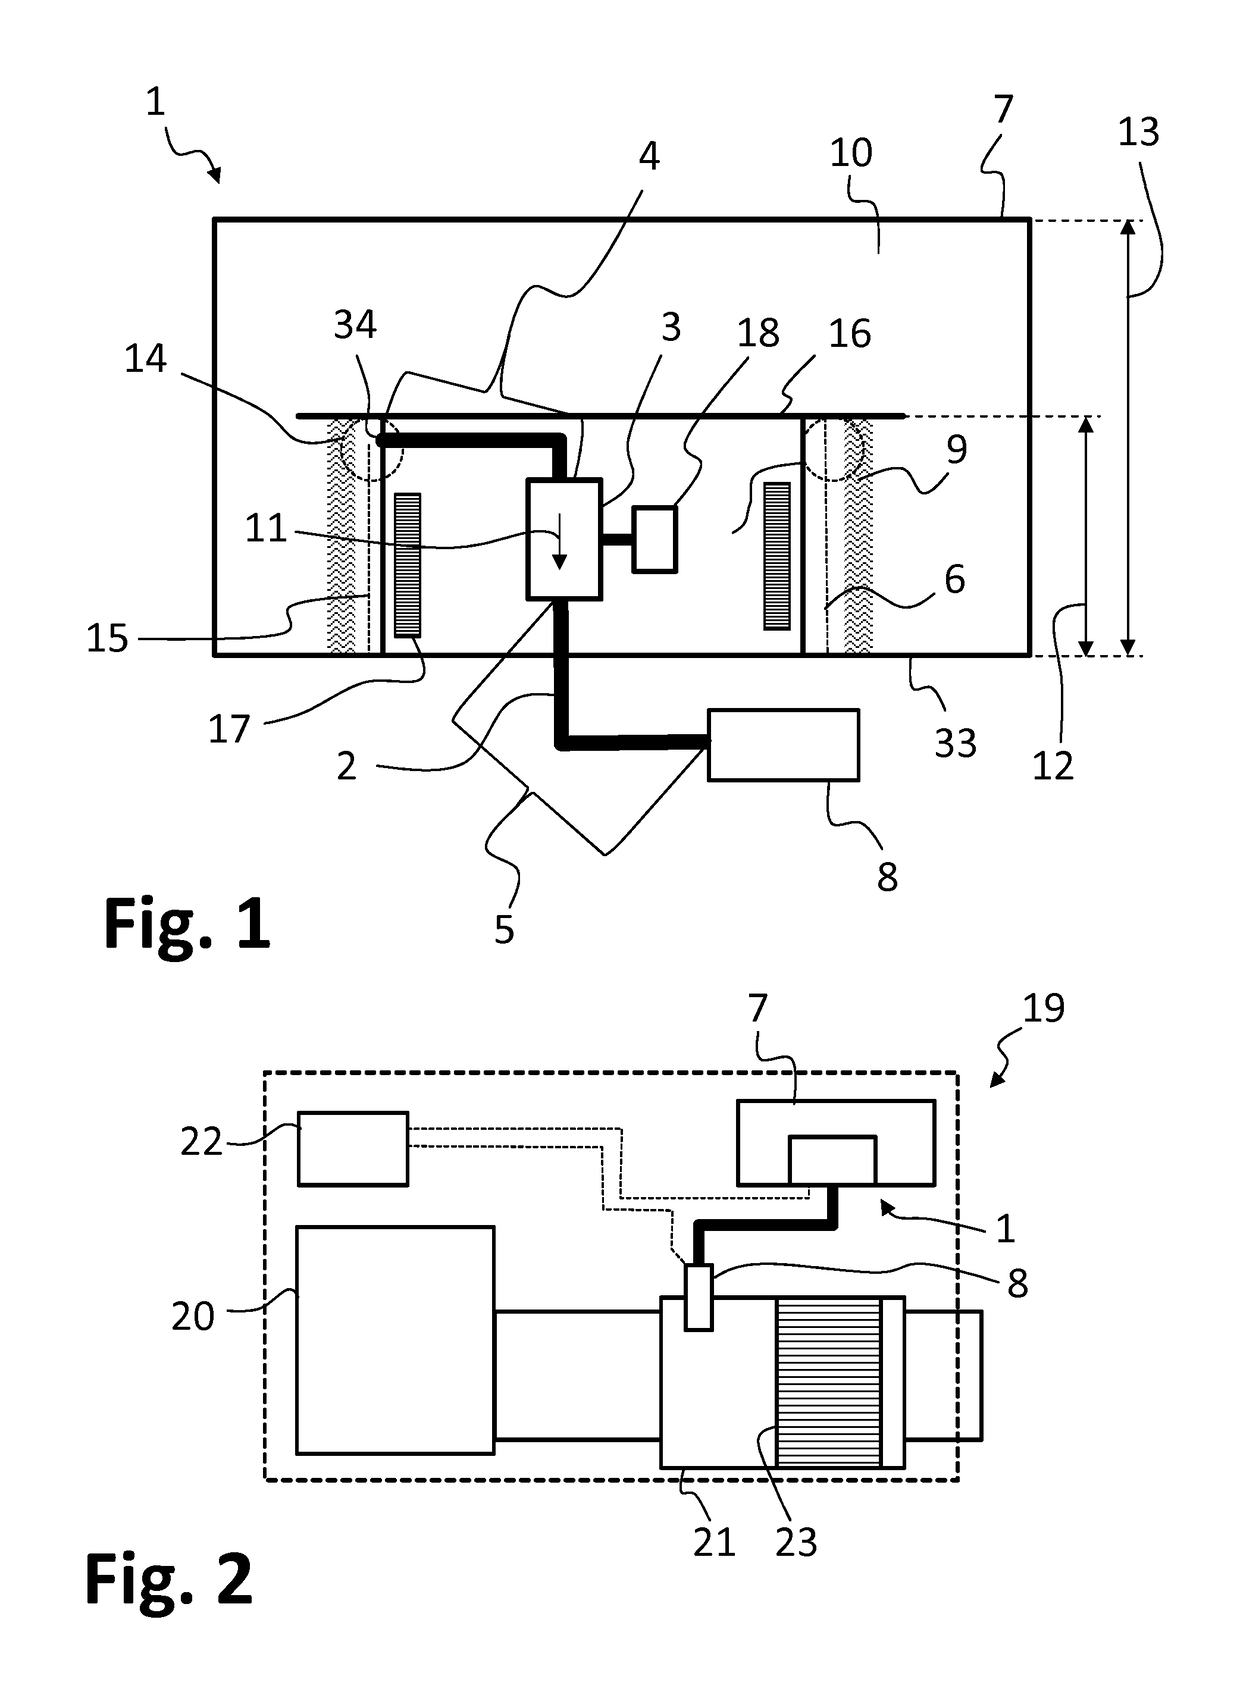 Method for operating a device for conveying a liquid